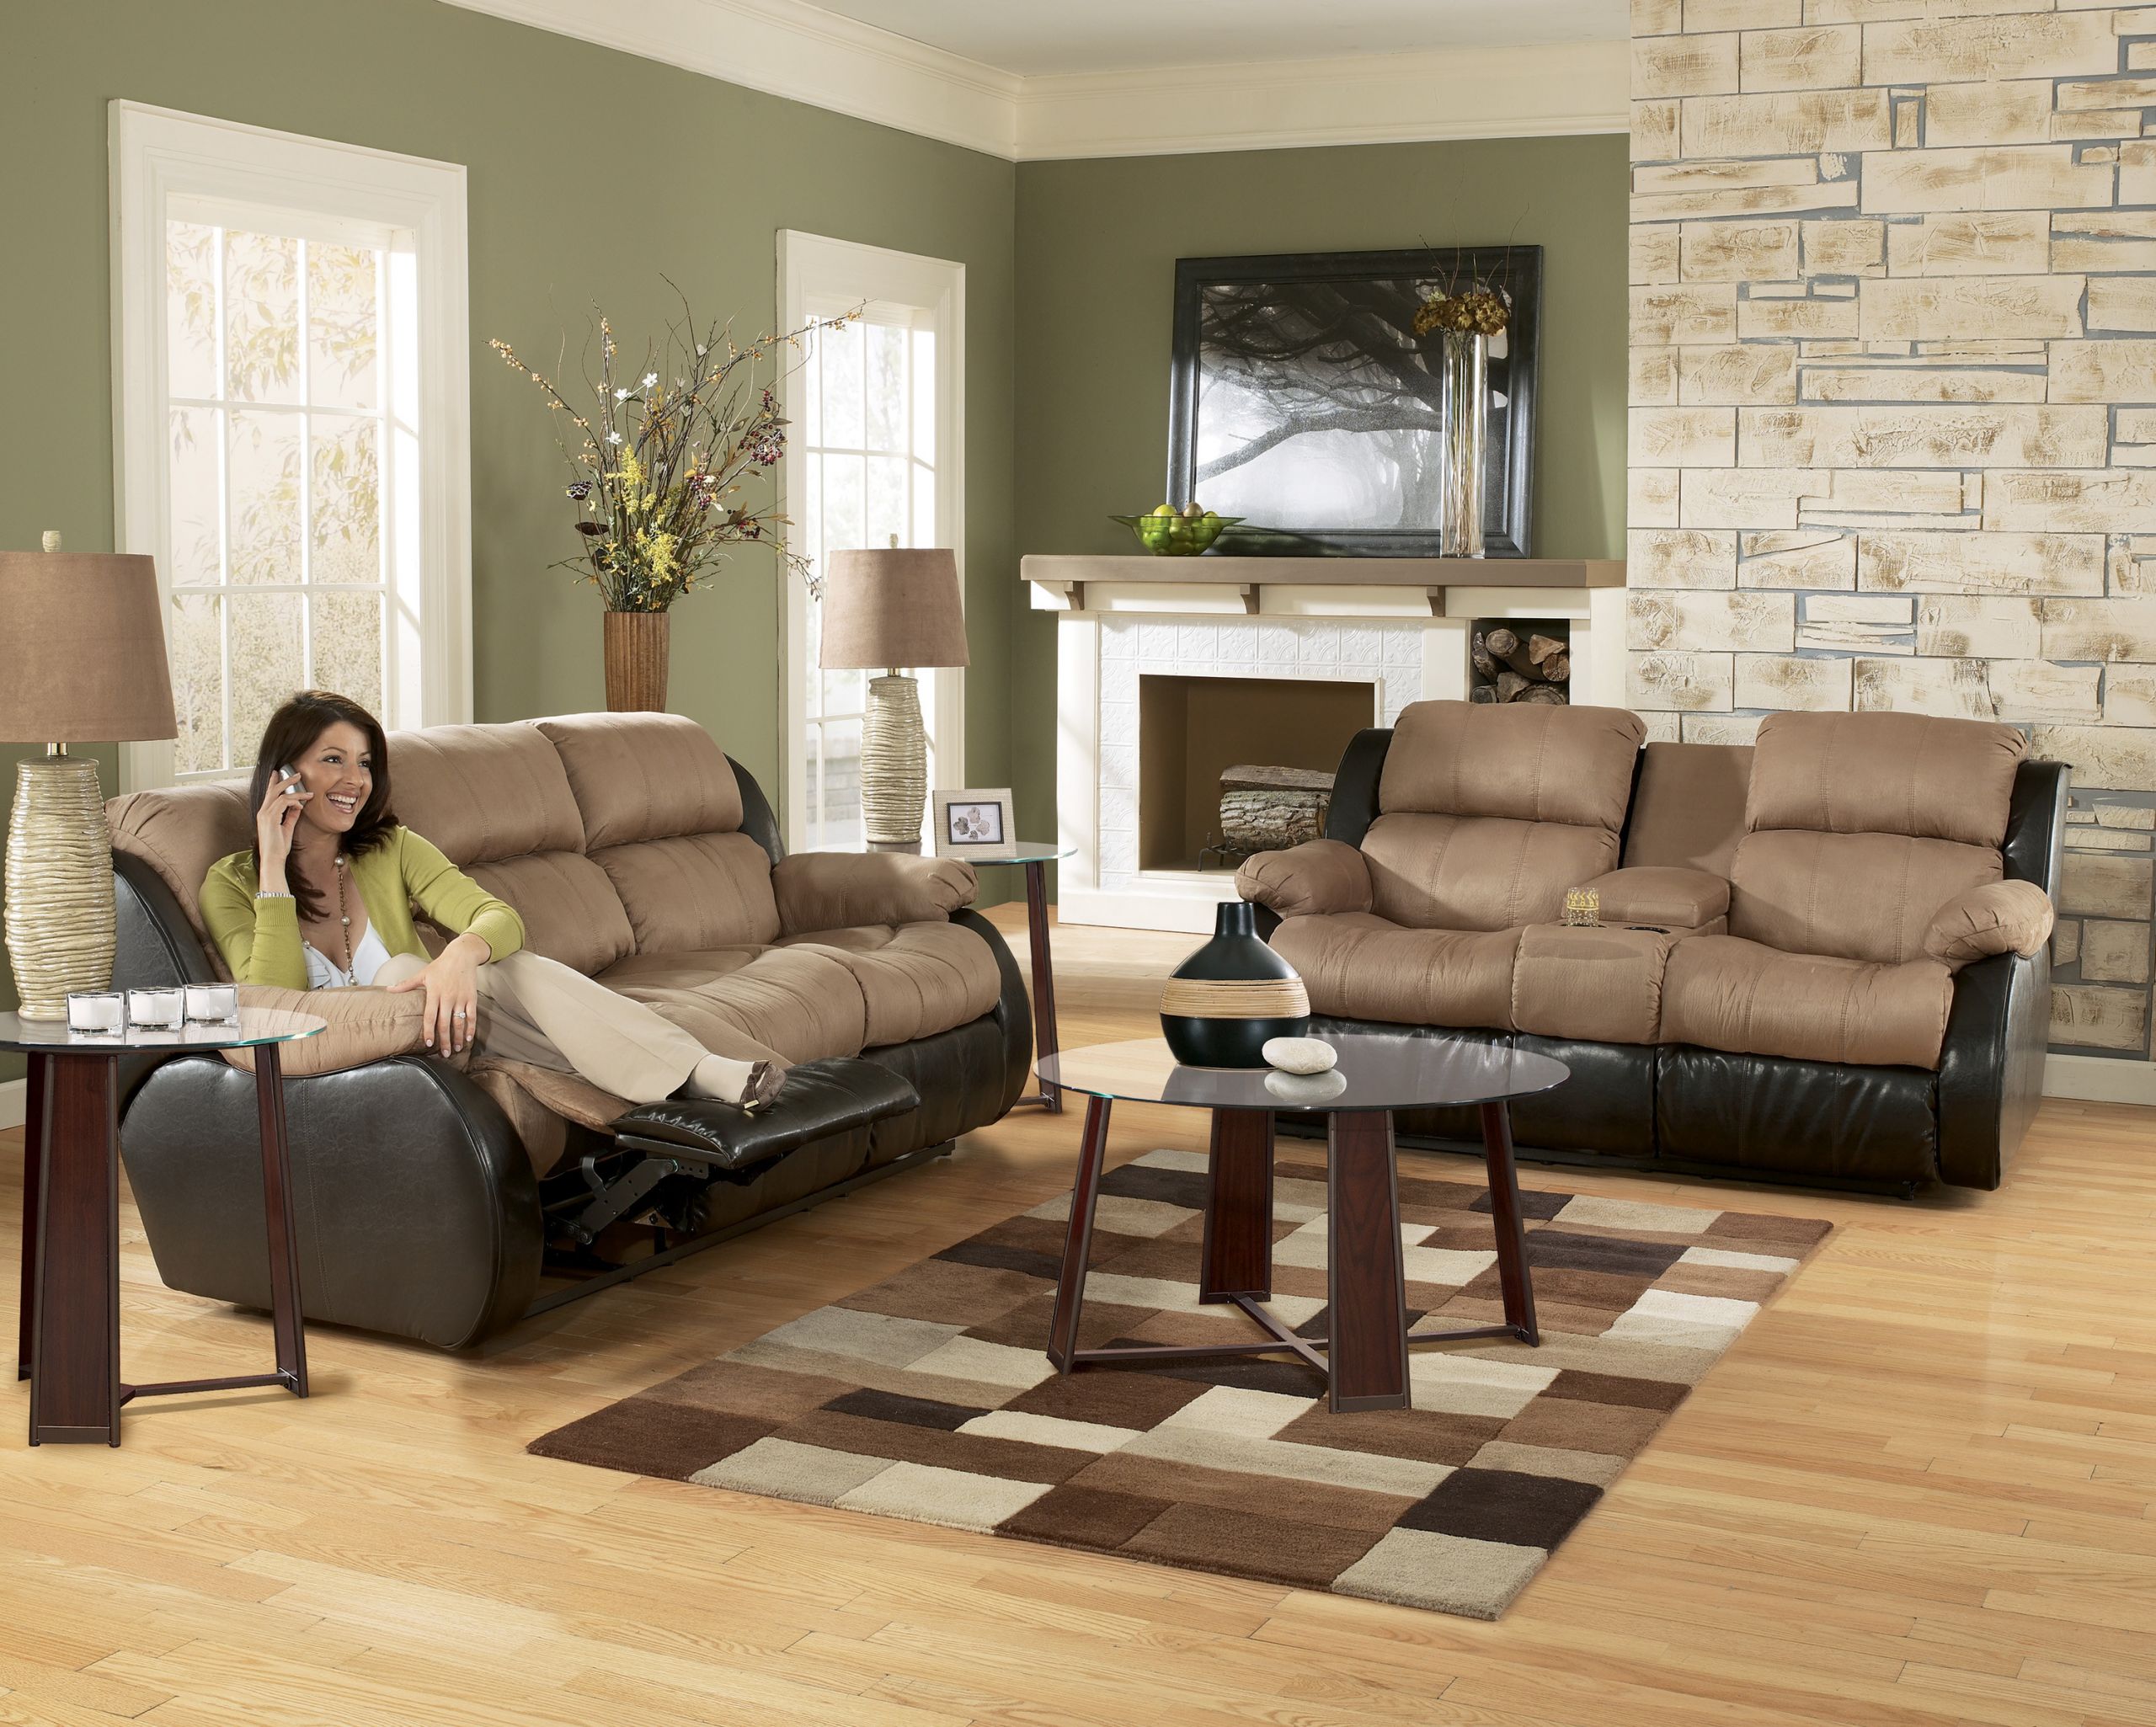 Living Room Recliner Chairs
 Ashley Furniture Presley Cocoa Living Room Set